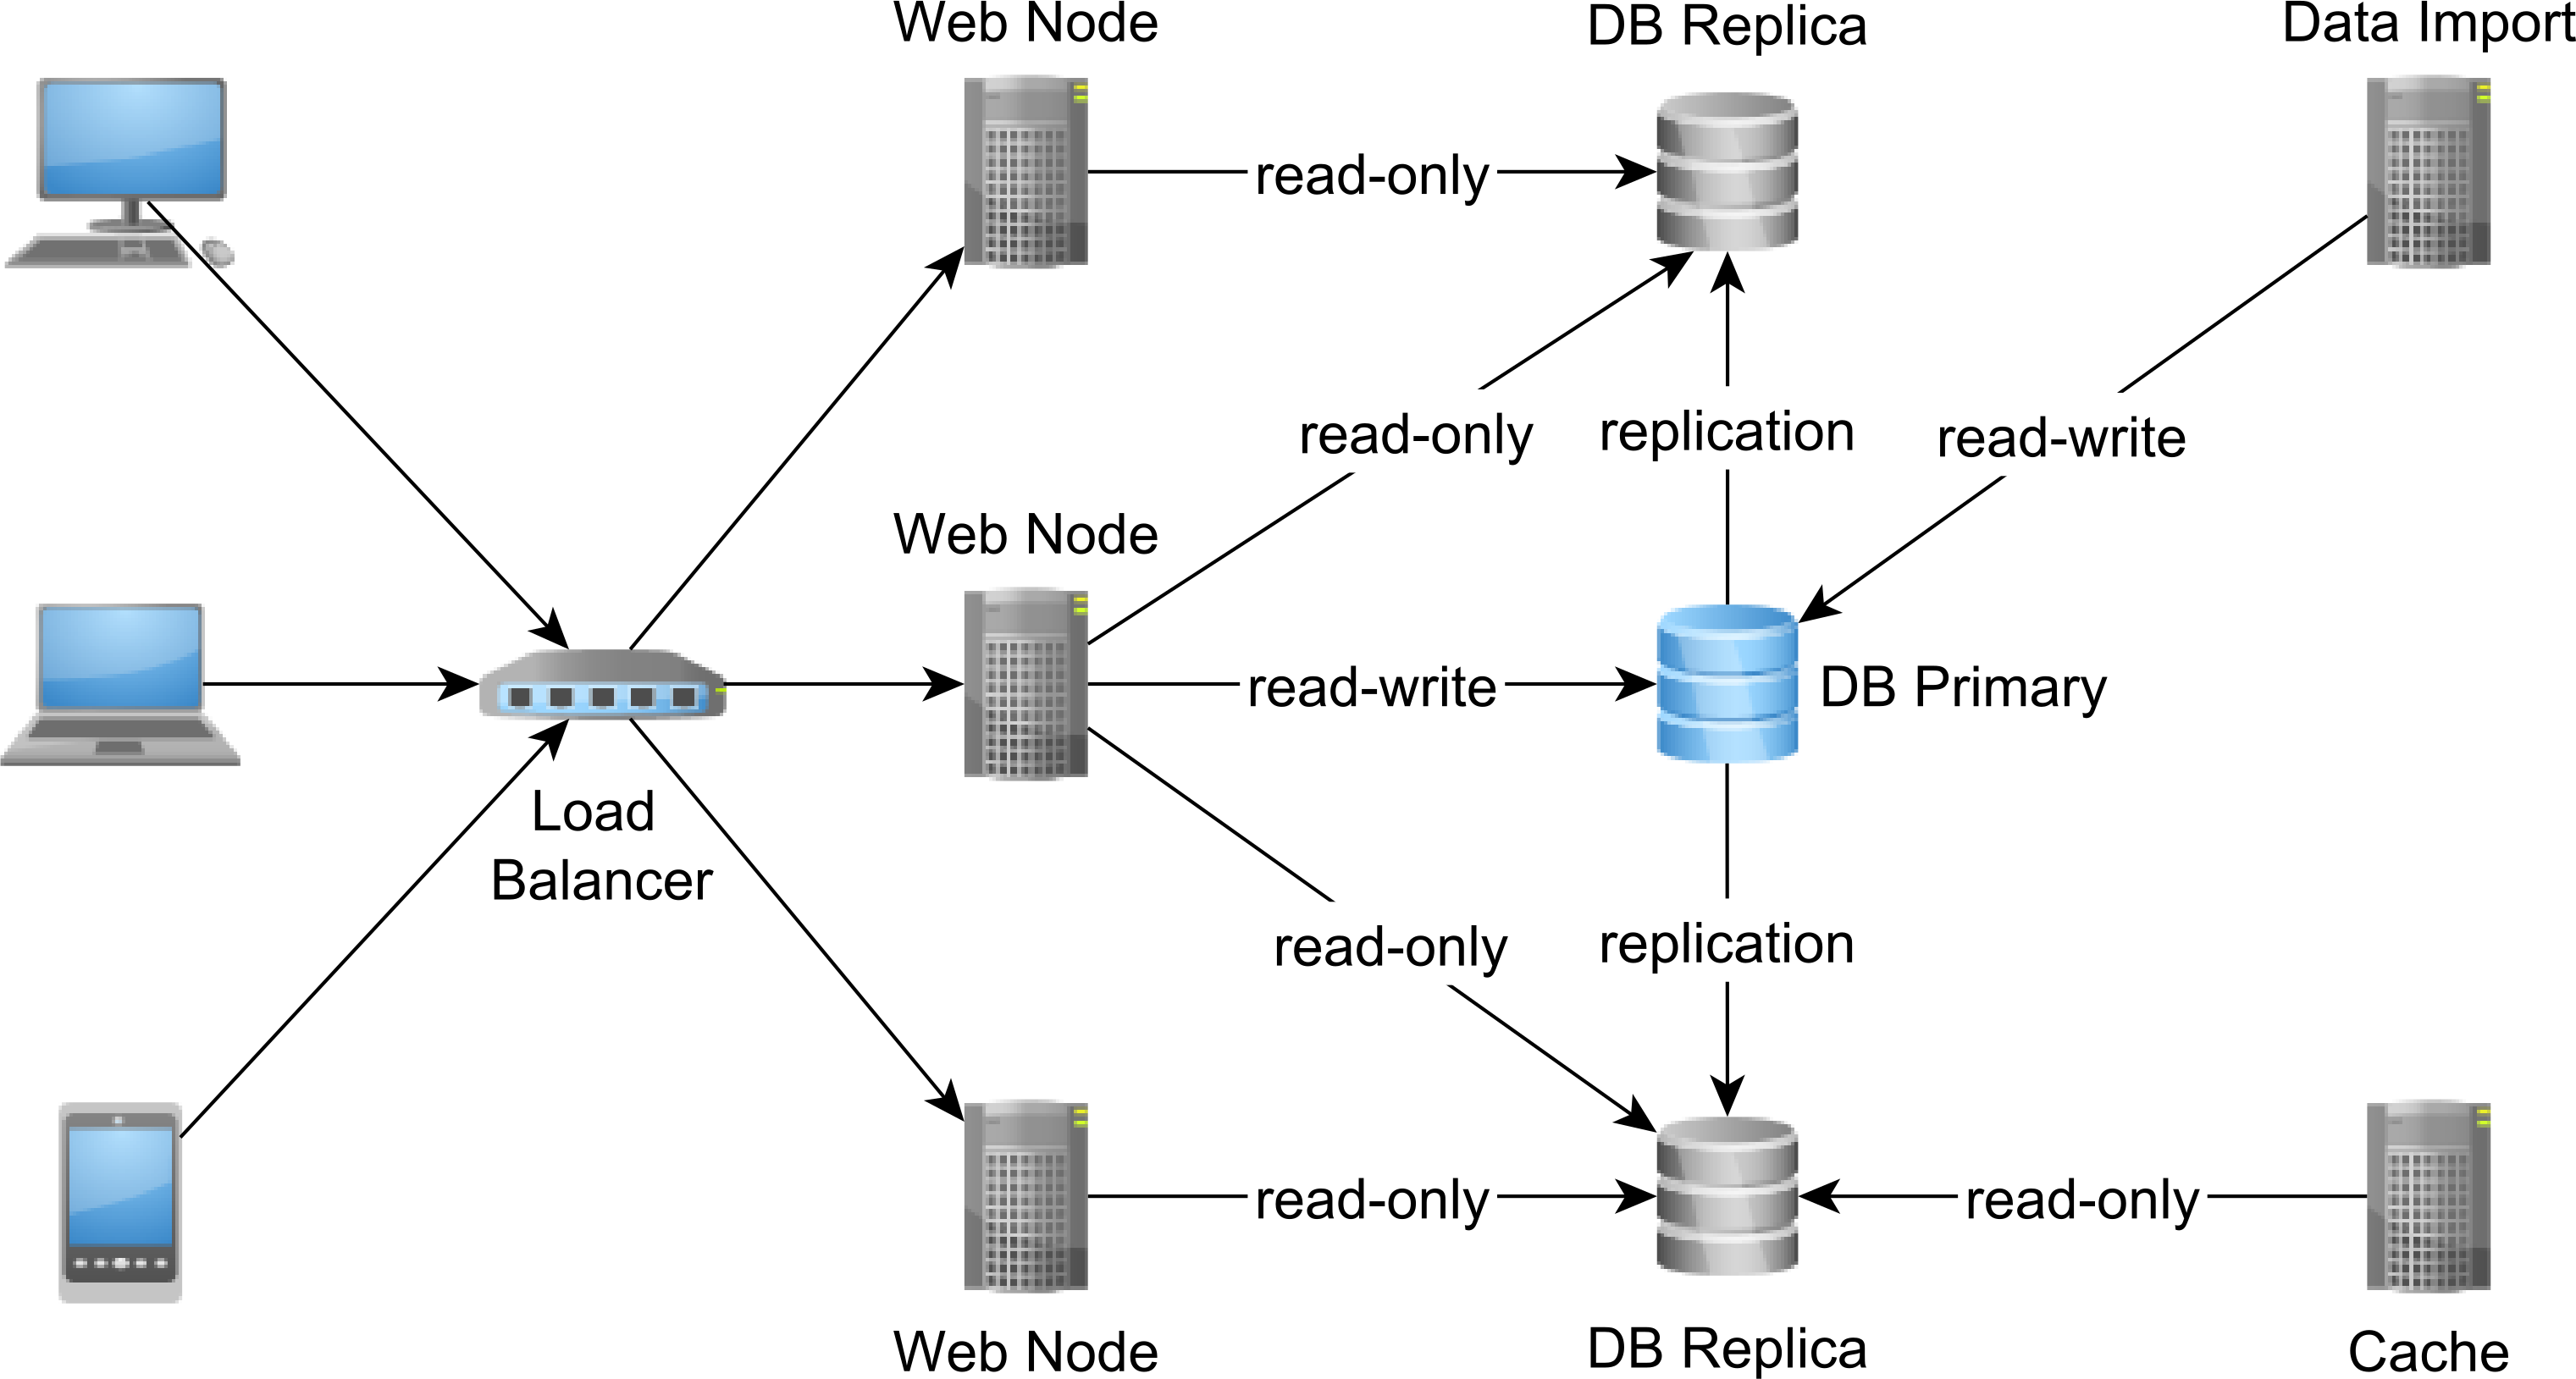 A diagram of a cloud service replication setup, showing how data is replicated from the primary database to a replica for backup purposes, with read-only access to the replica for web nodes and the ability to import data.